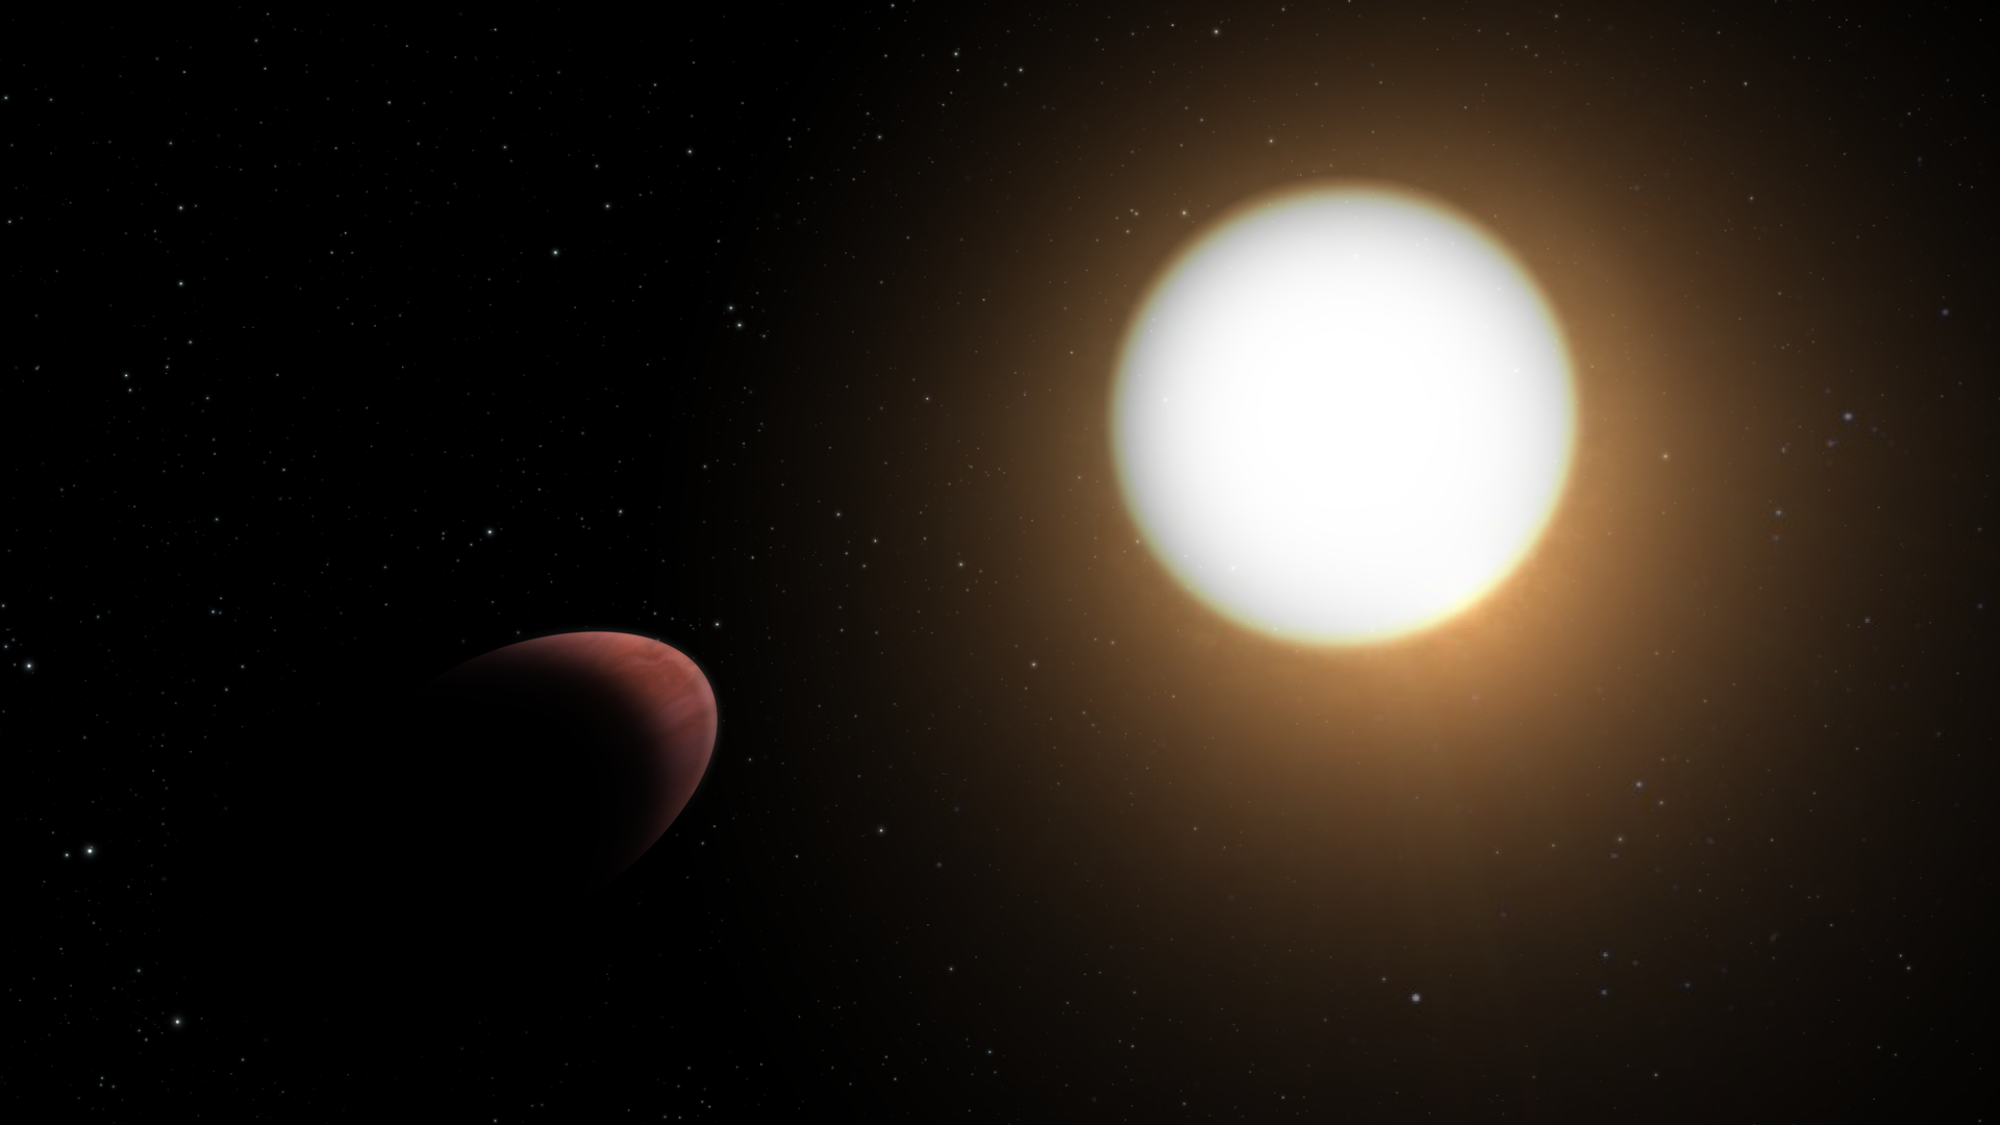 a weirdly shaped exoplanet